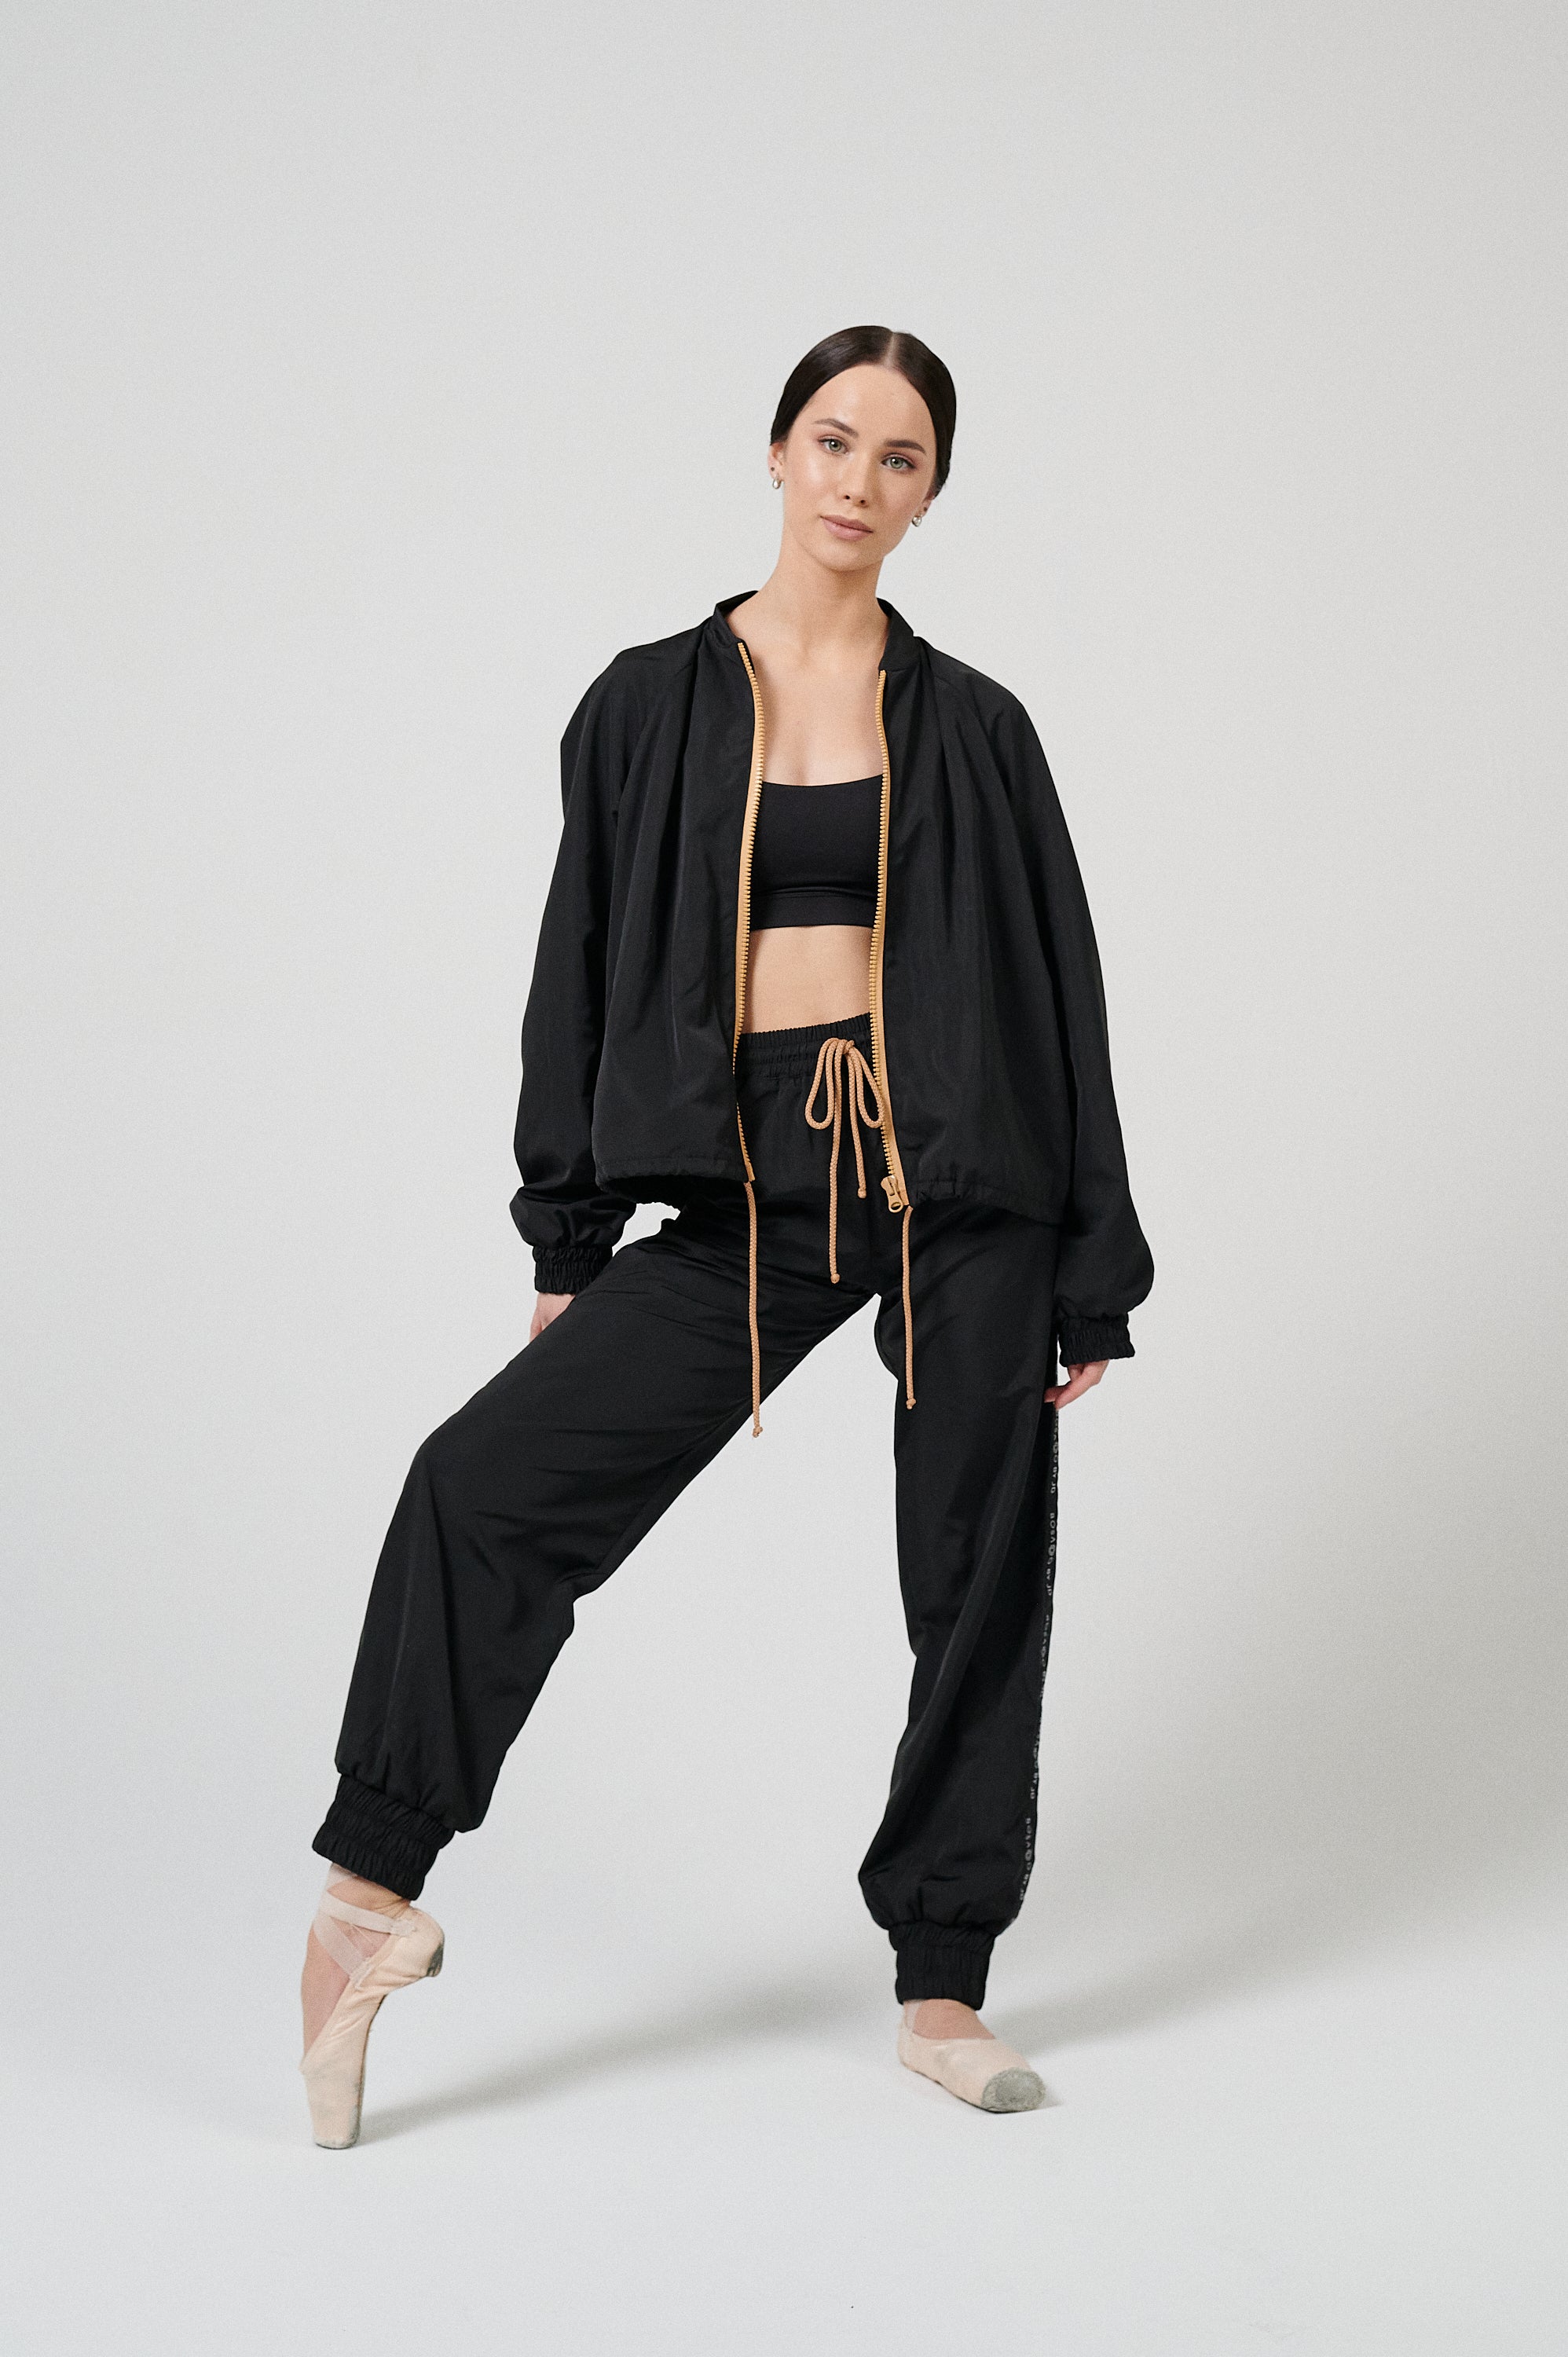 Bosaddo by Jurgita Dronina collection | Black sports suit with pants